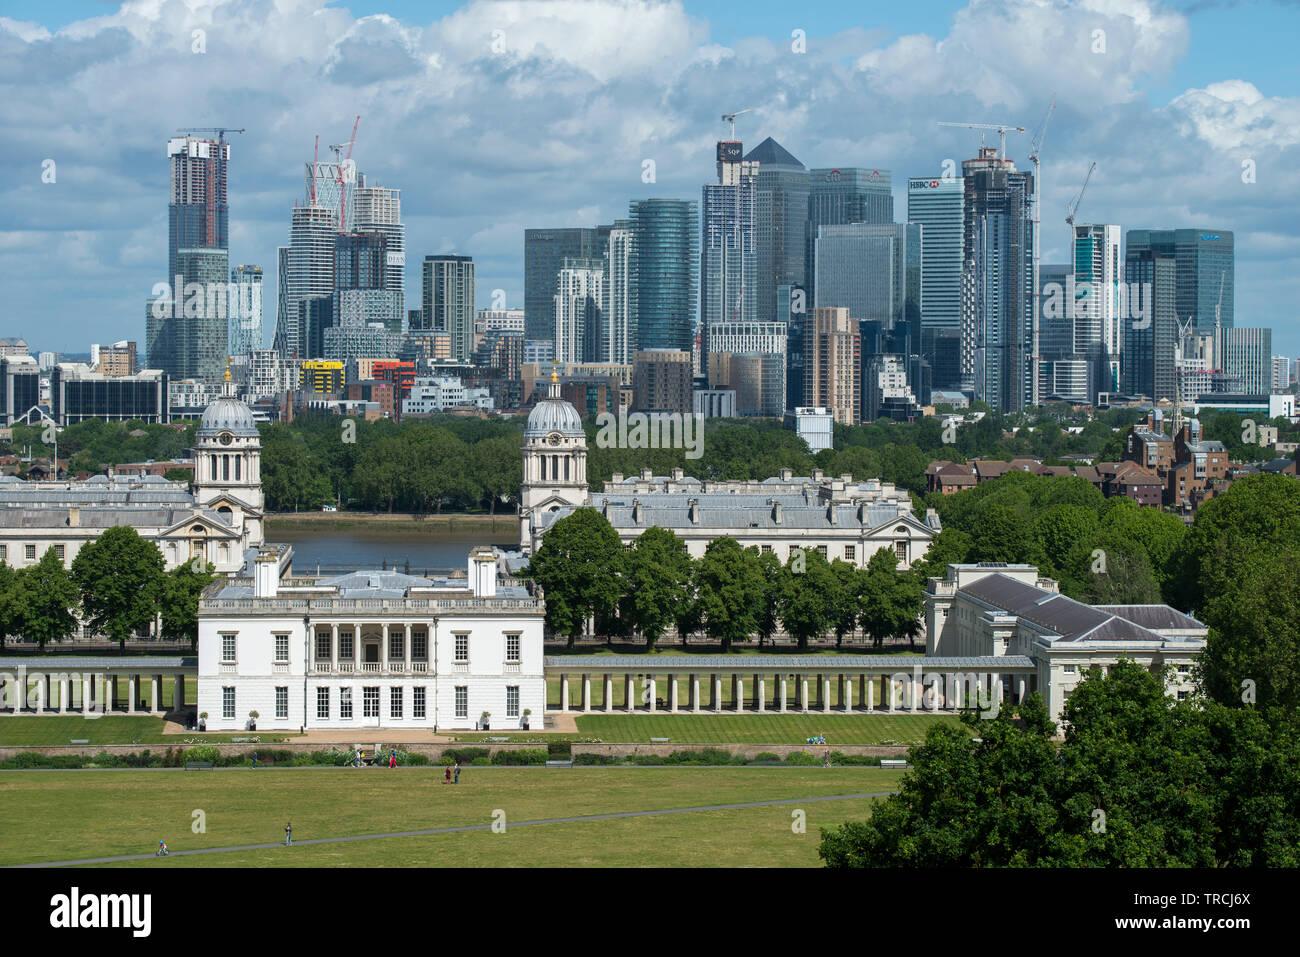 London England UK. Canary Wharf and Queen's House Greenwich photographed from Greenwich Park in South East London. May 2019 Stock Photo